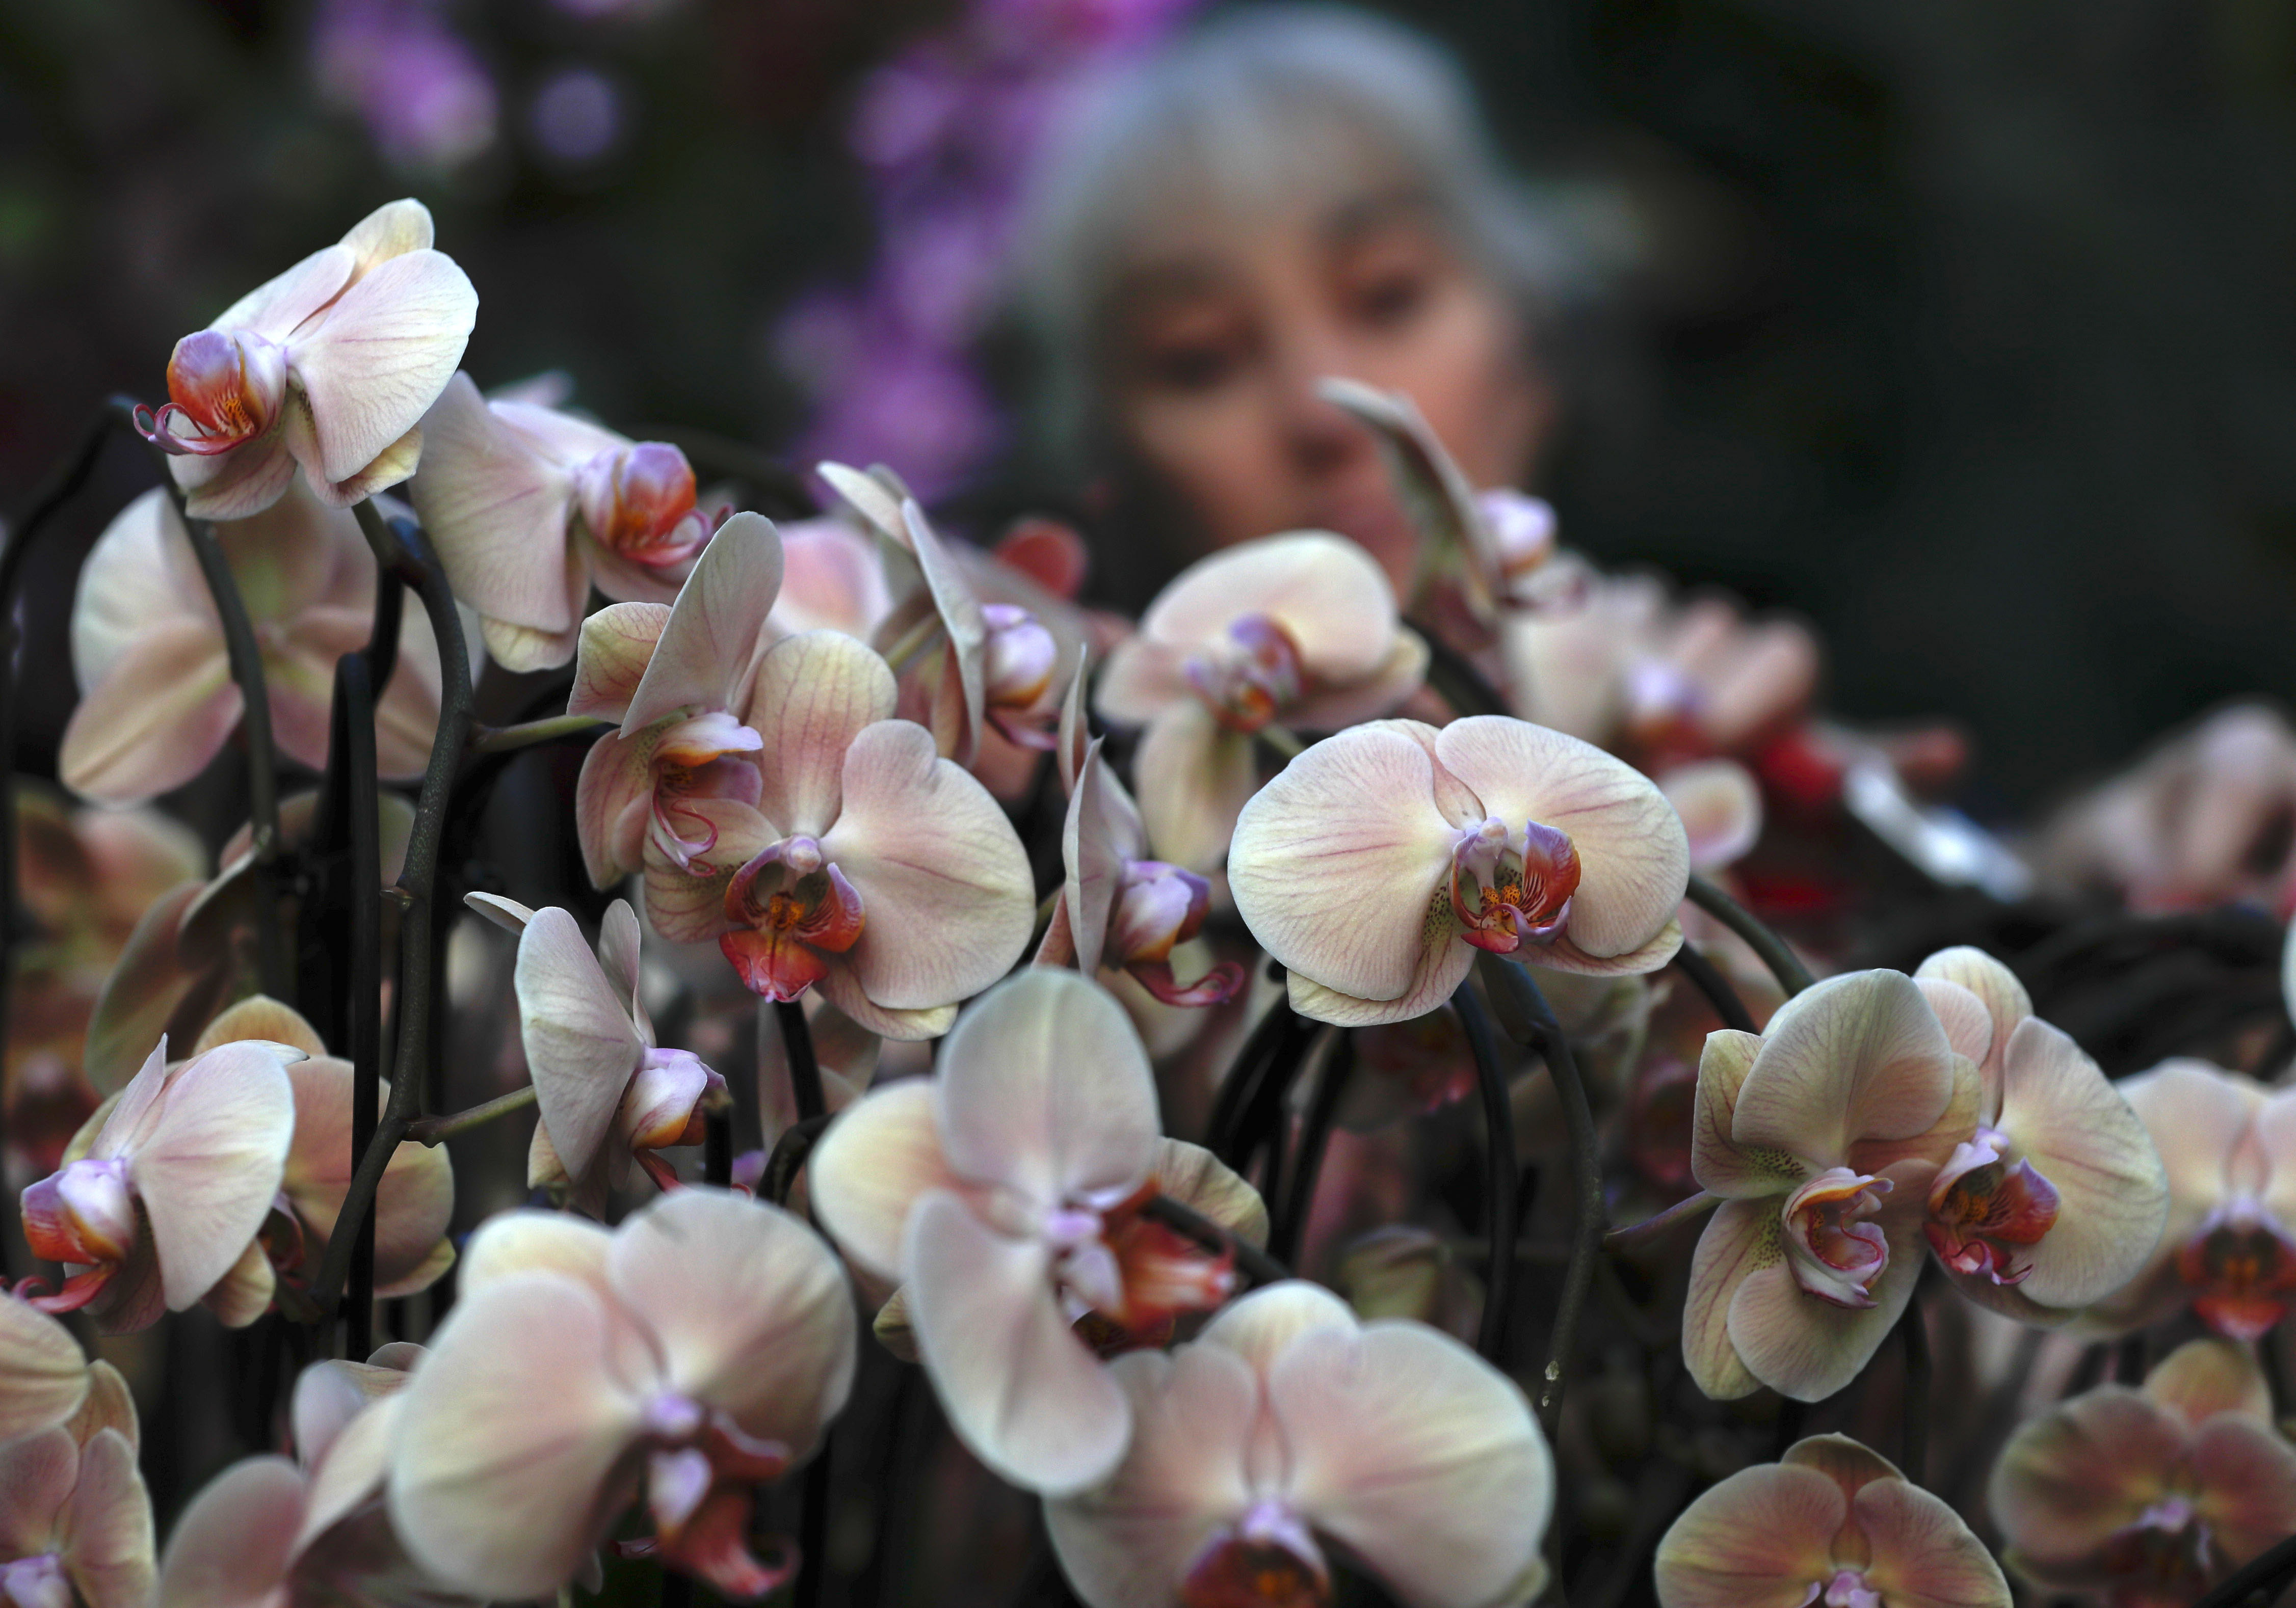 Sal Demain, a Kew diploma student, attends to a display of orchids at the Kew Gardens Orchid Festival during a press preview at Kew Gardens in London, Thursday, Feb. 7, 2019. The display of some 6,200 orchids took 30 days to complete, with the central display showing off the biodiversity of Colombia which is home to more species of orchid than anywhere else in the world. The display opens to the public on Feb.9. (AP Photo/Alastair Grant)